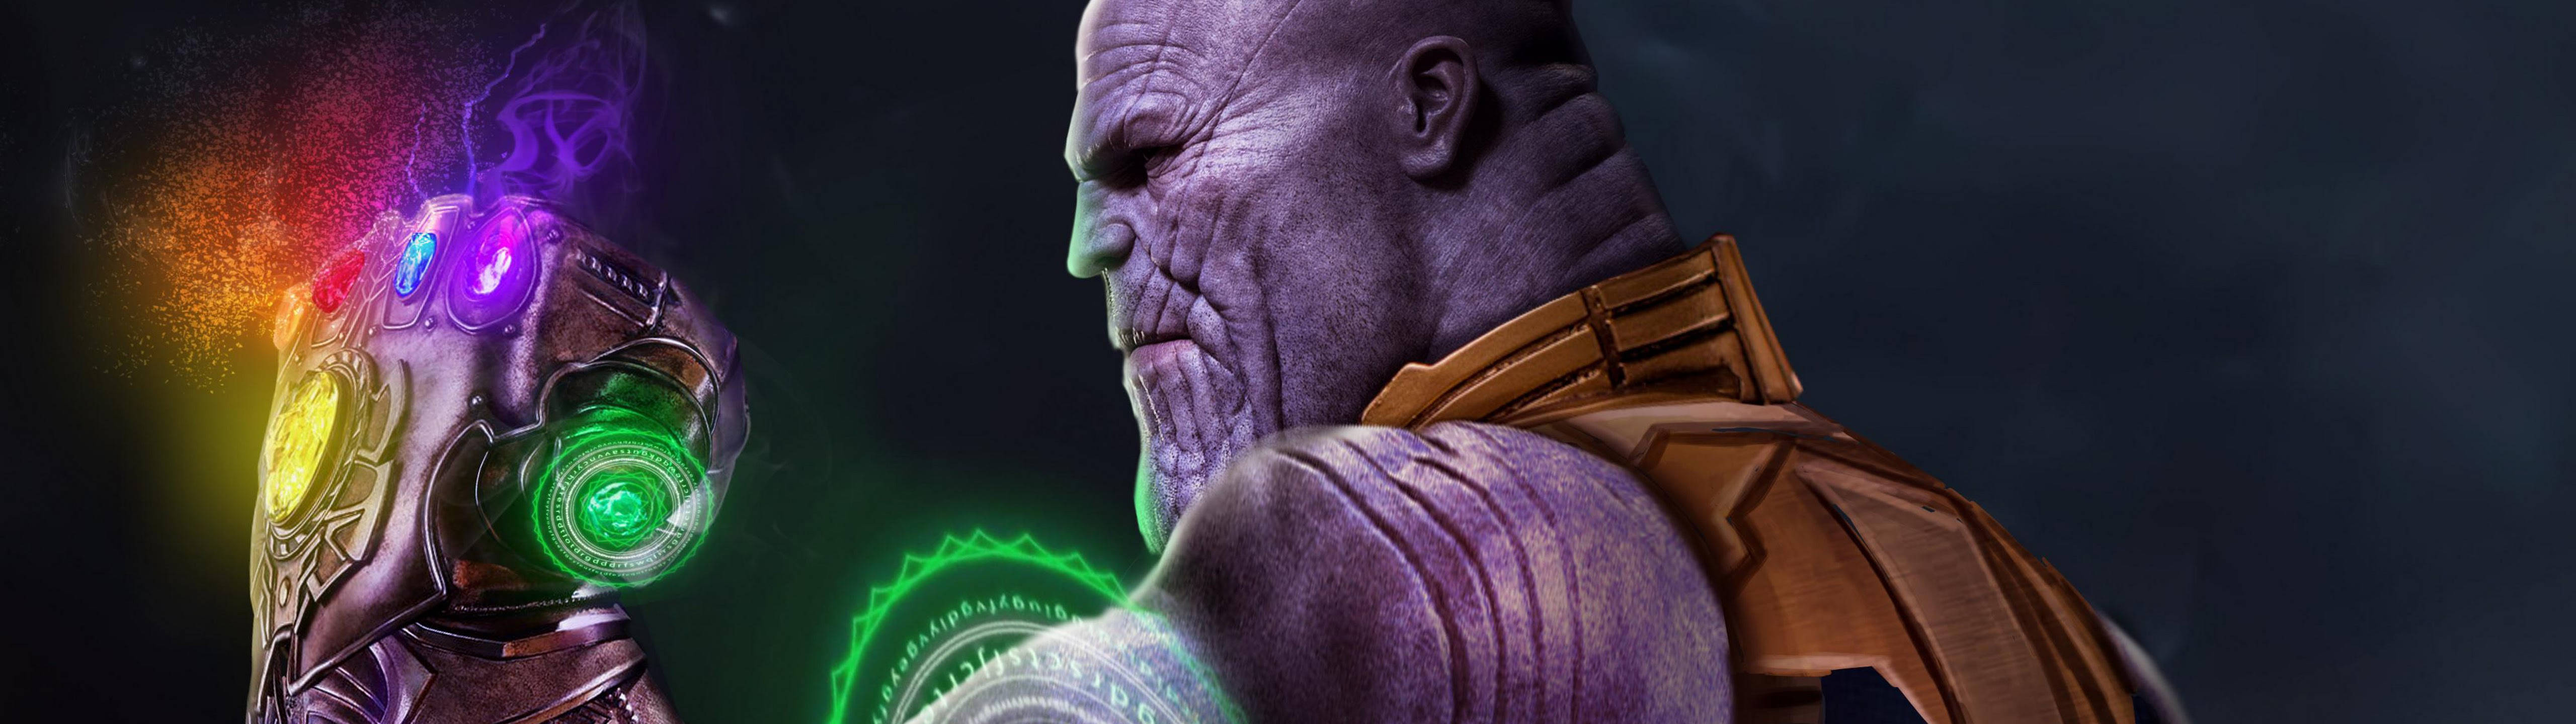 Marvel's Thanos With Infinity Gauntlet 5120 X 1440